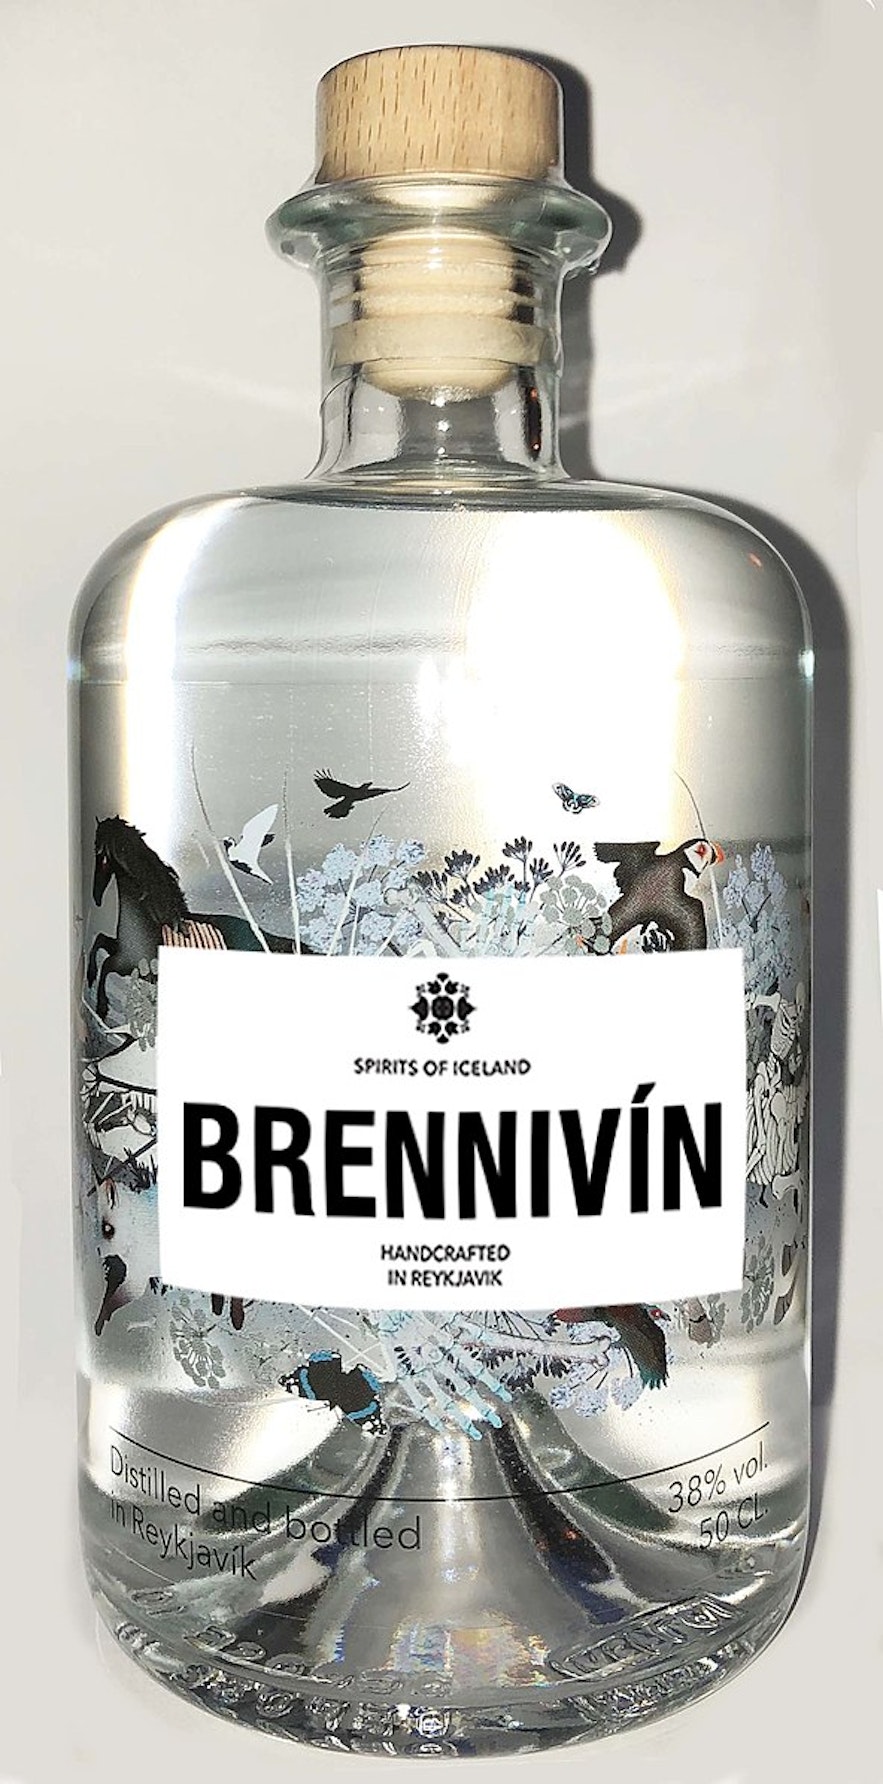 Brennivin, also known as Black Death, is a favorite among Icelandic people